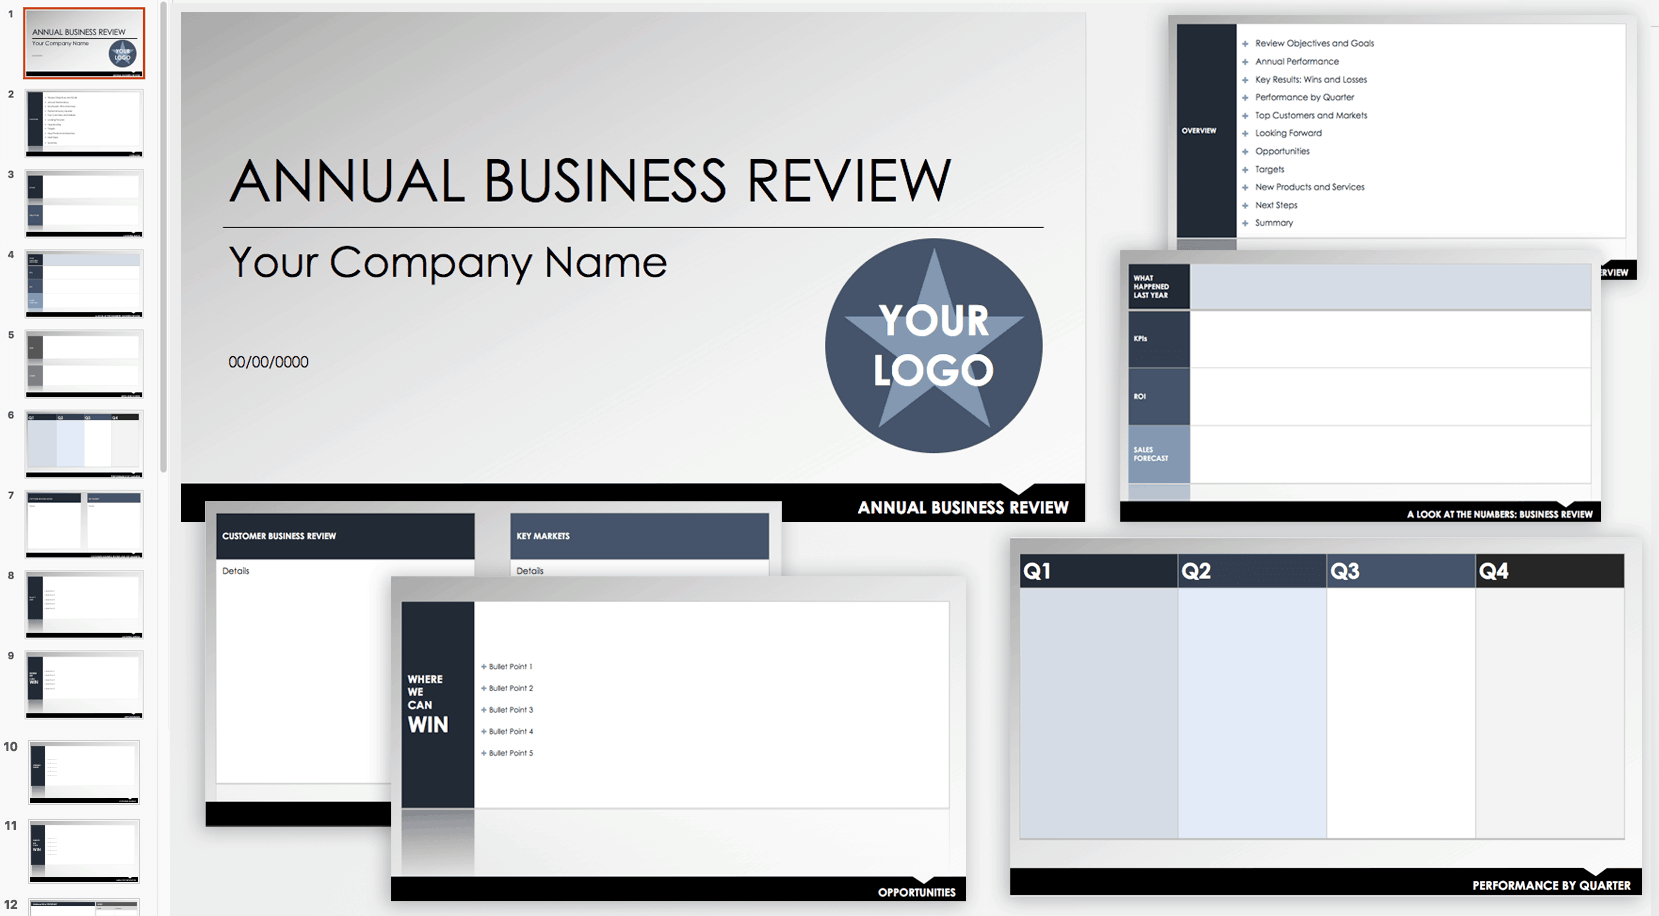 Free Qbr And Business Review Templates | Smartsheet Intended For Business Review Report Template